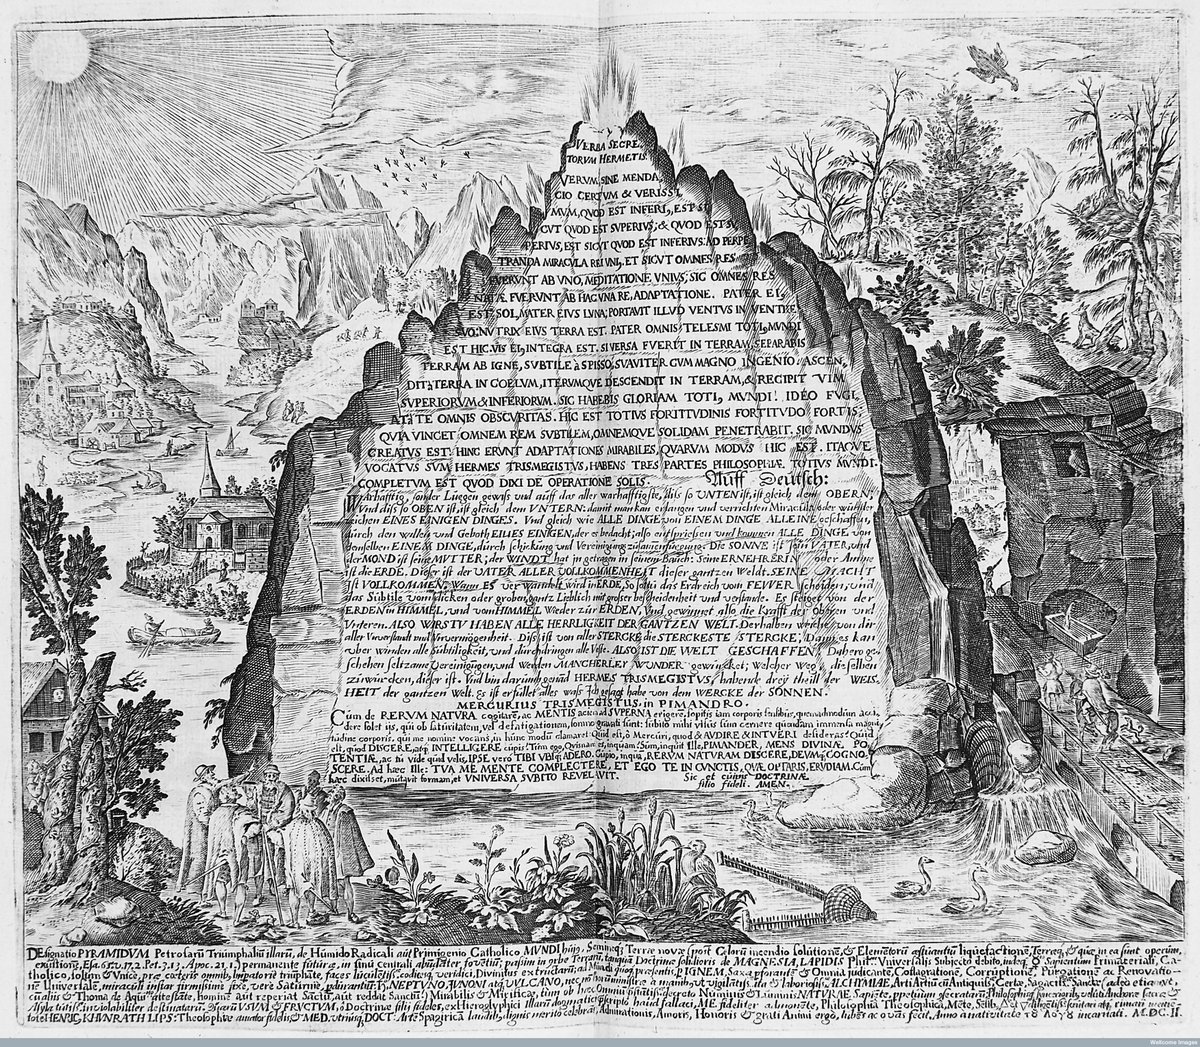 Was The Emerald Tablet real?